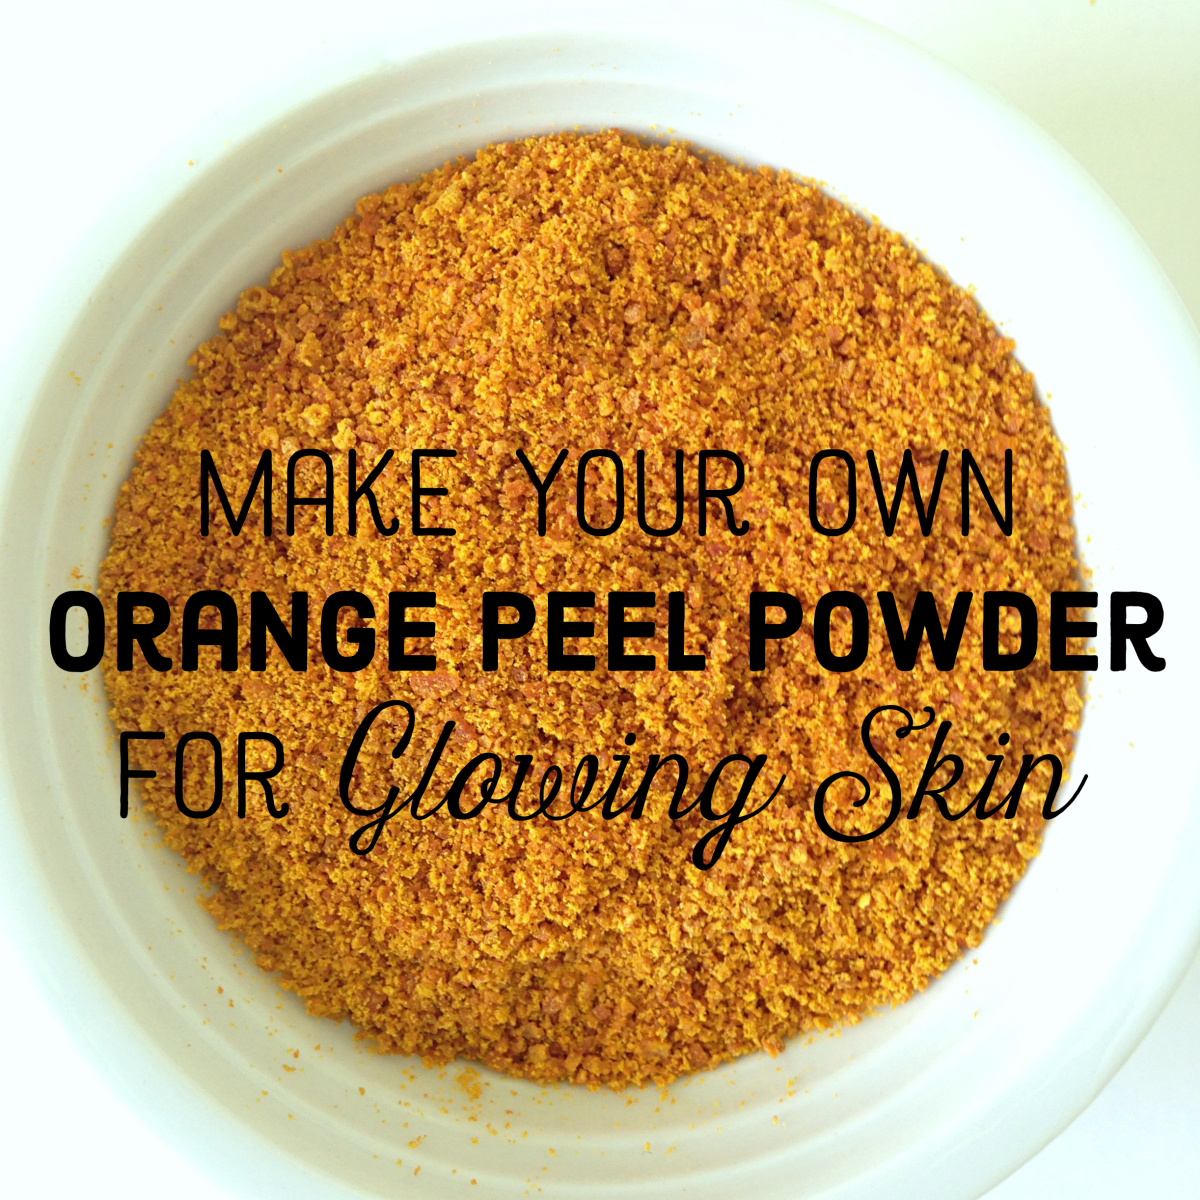 Her's how to make your own orange peel powder/